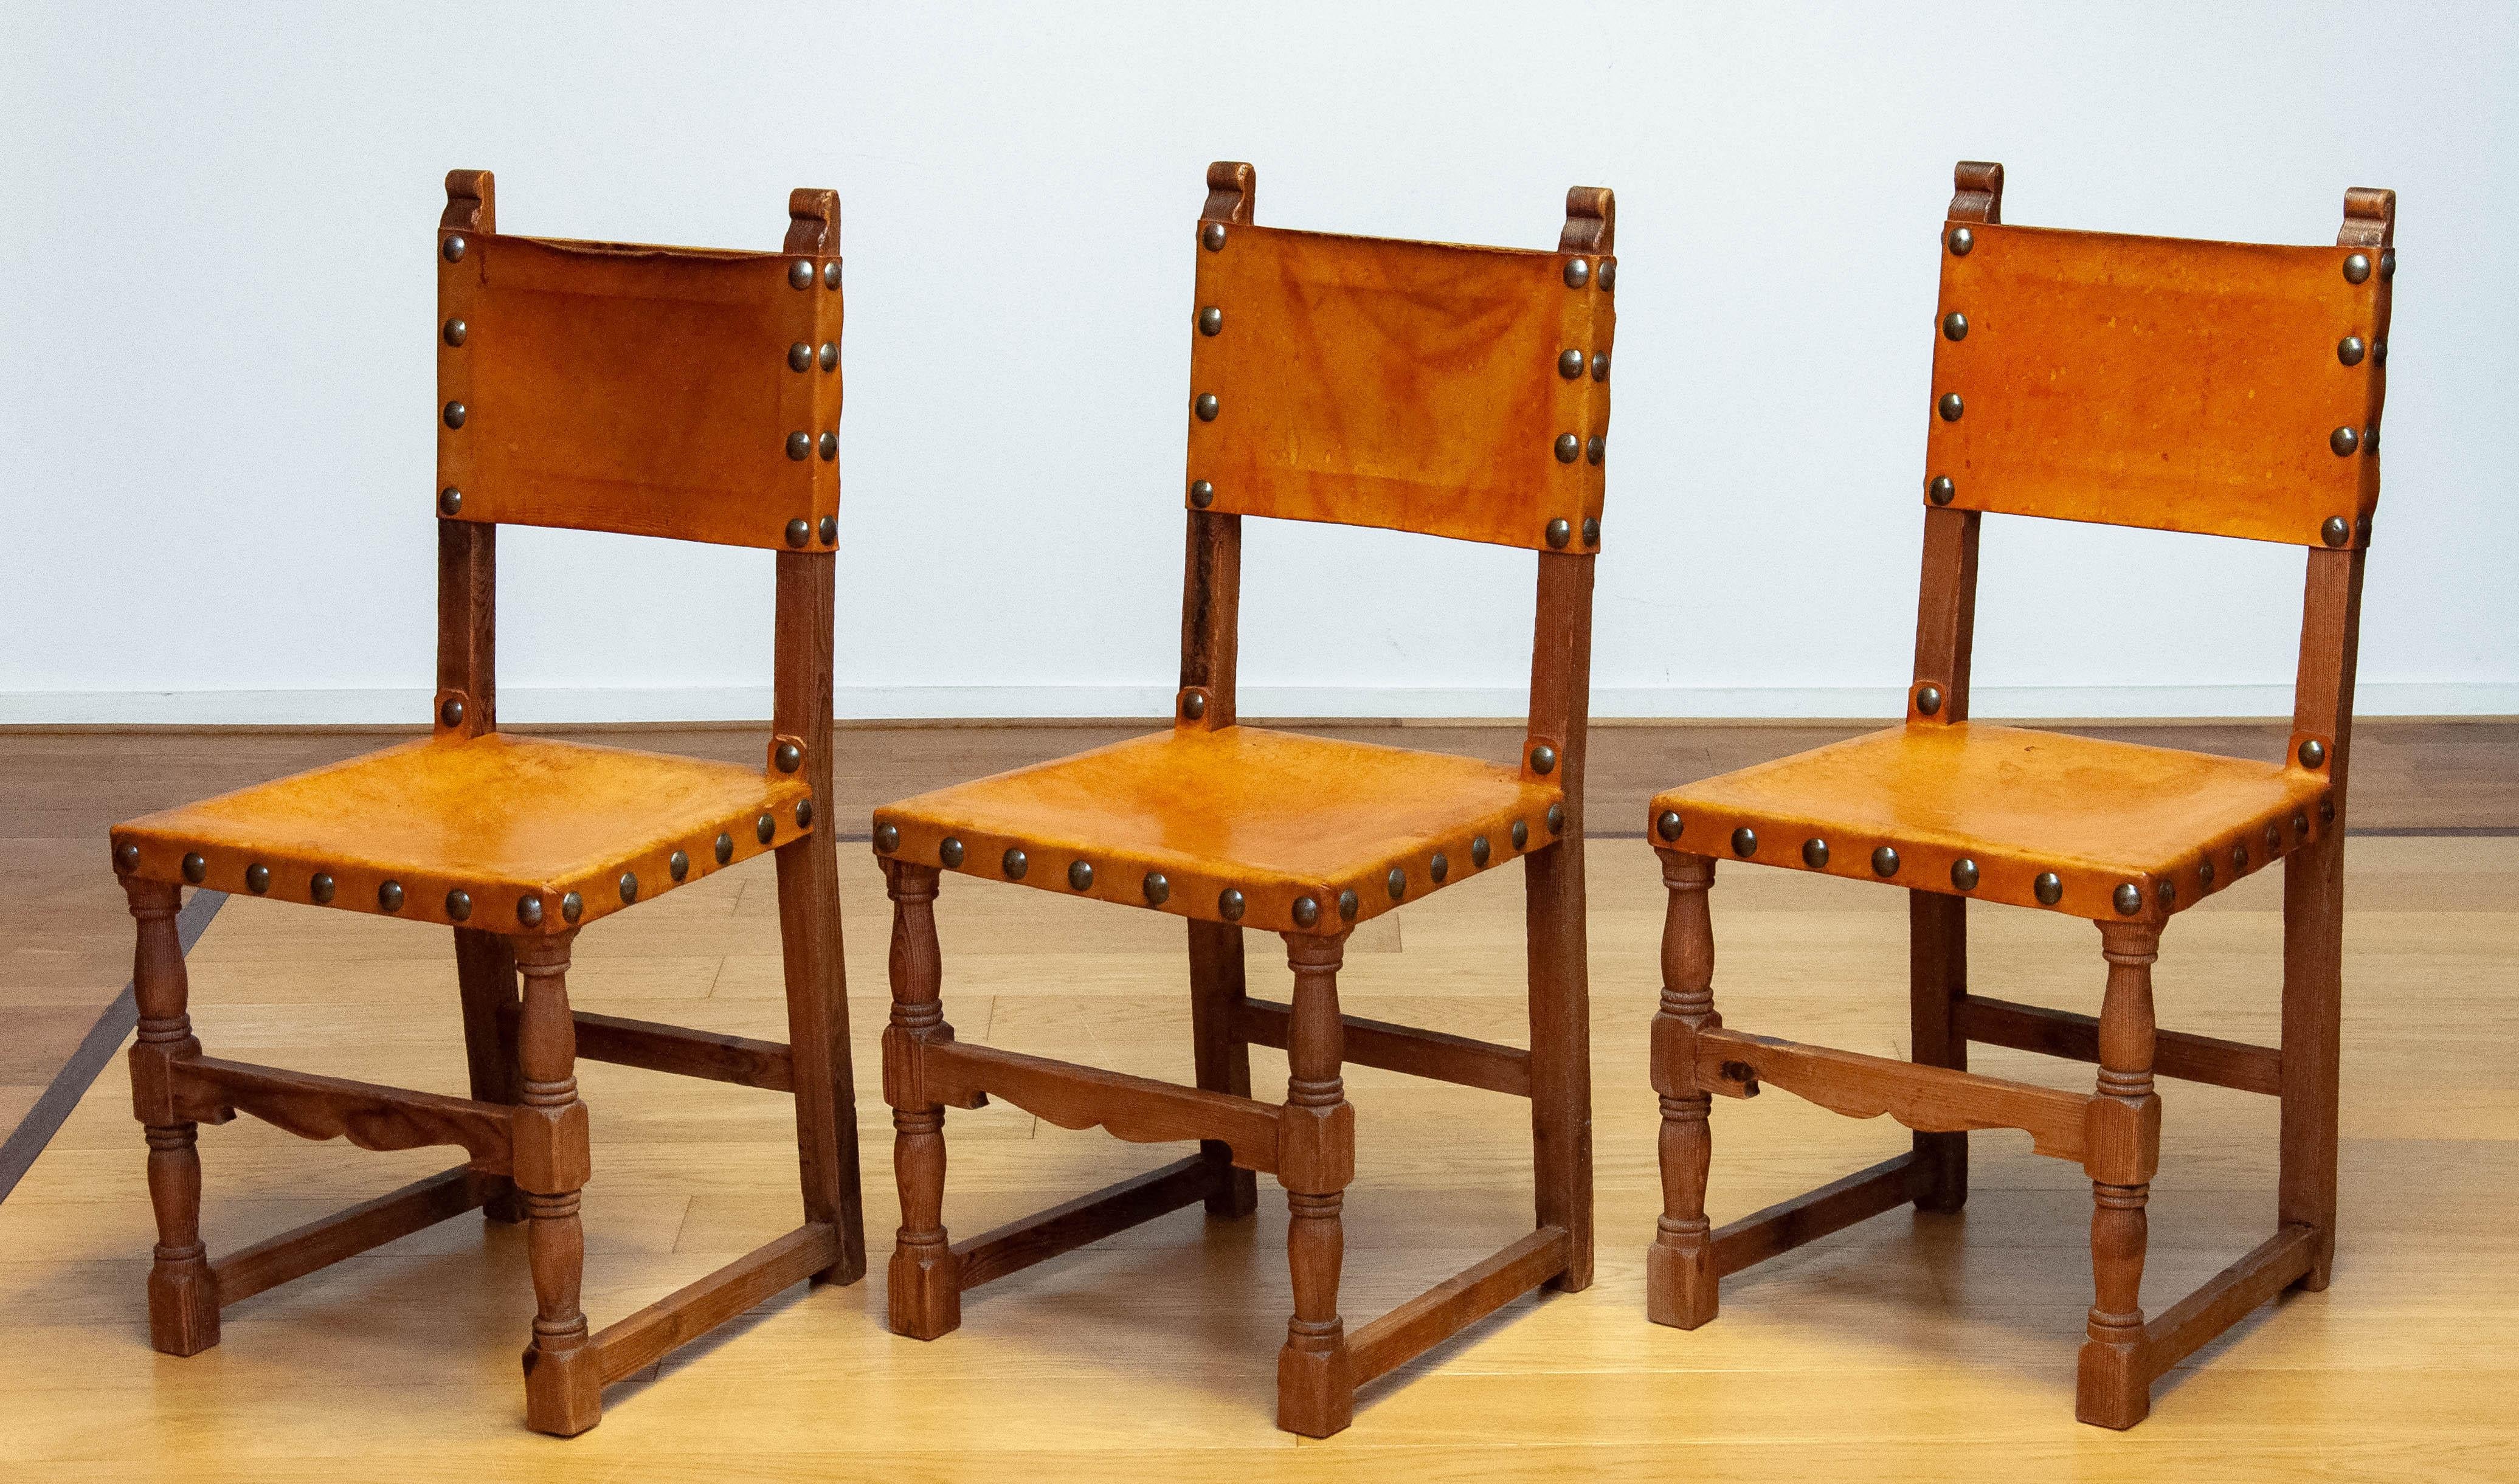 6 Antique Swedish Folk Art Farm County Dining Chairs In Pine And Tan Leather For Sale 10